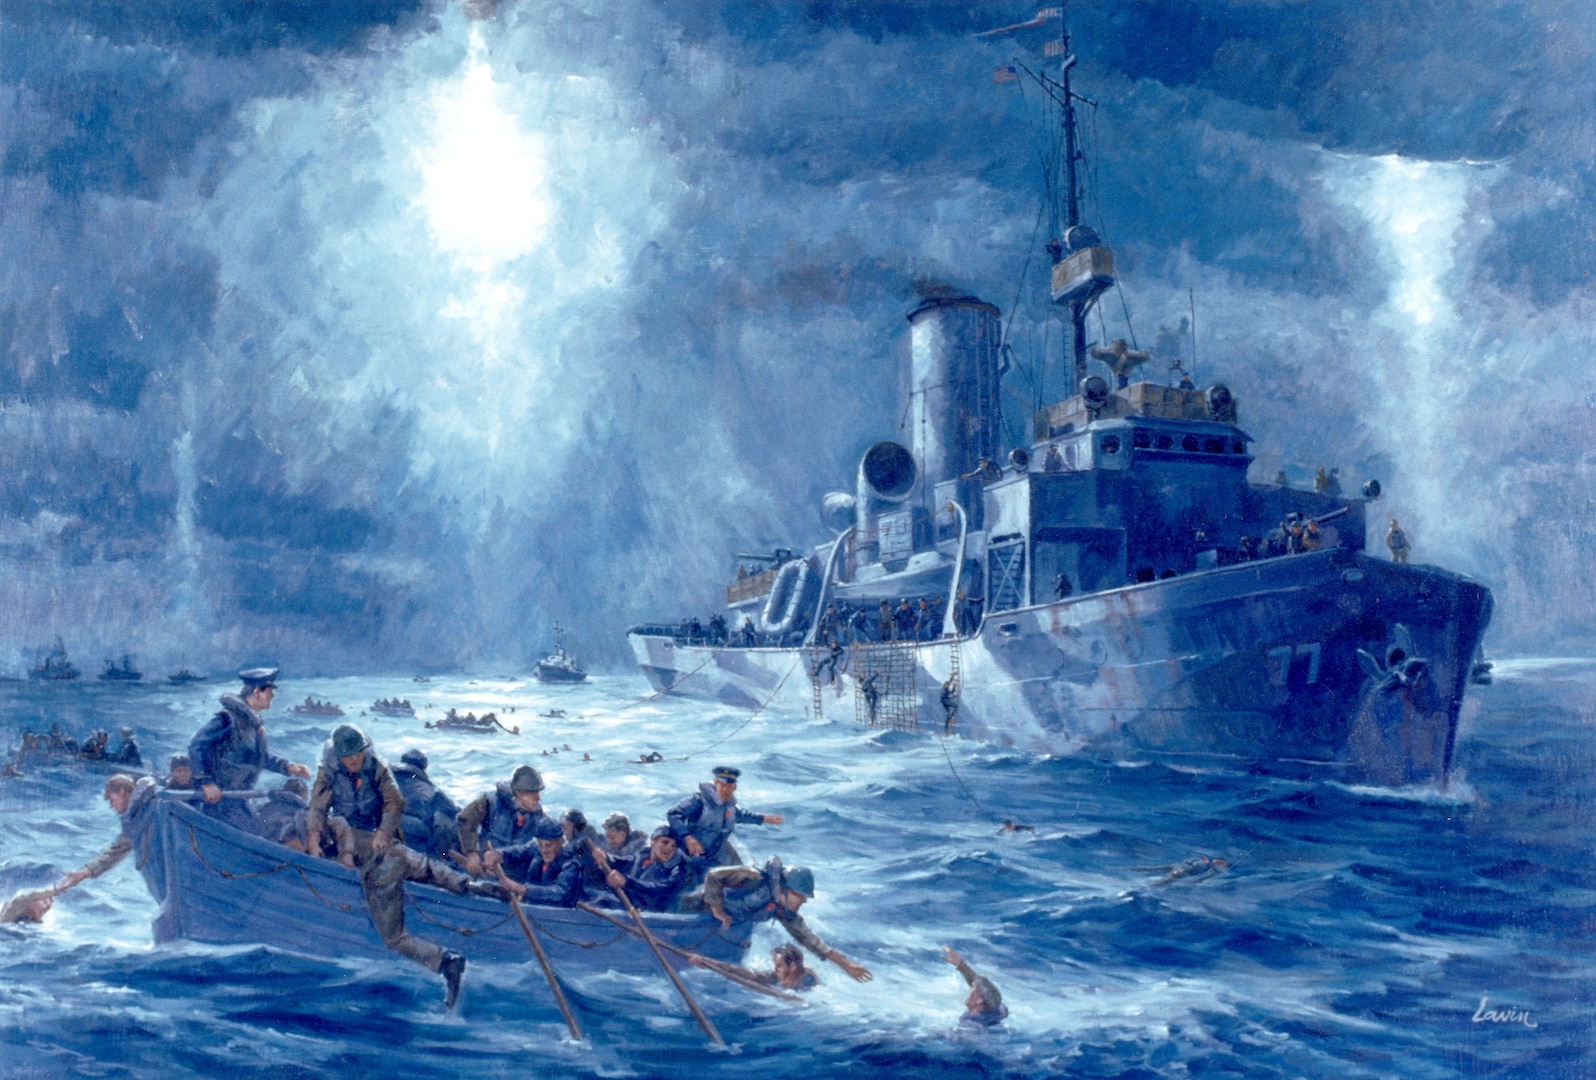 Painting of the Escanaba’s nighttime rescue effort painted by an unknown artist.